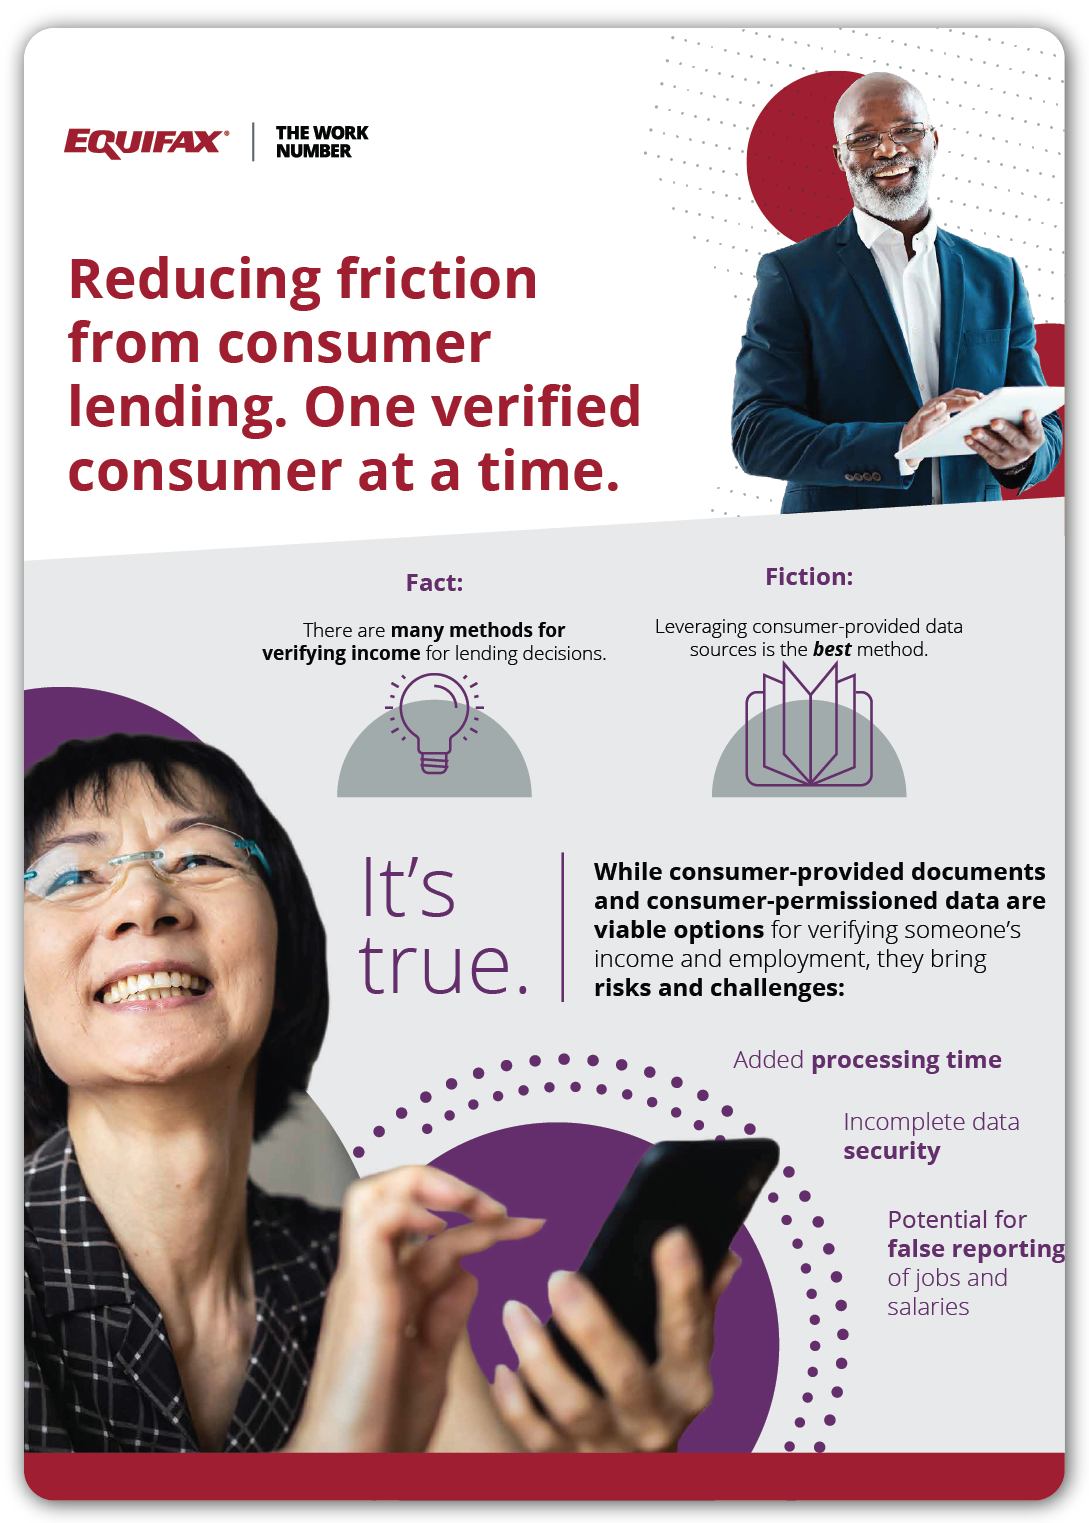 Reducing Friction From Consumer Lending. One Verified Consumer at a Time. Image